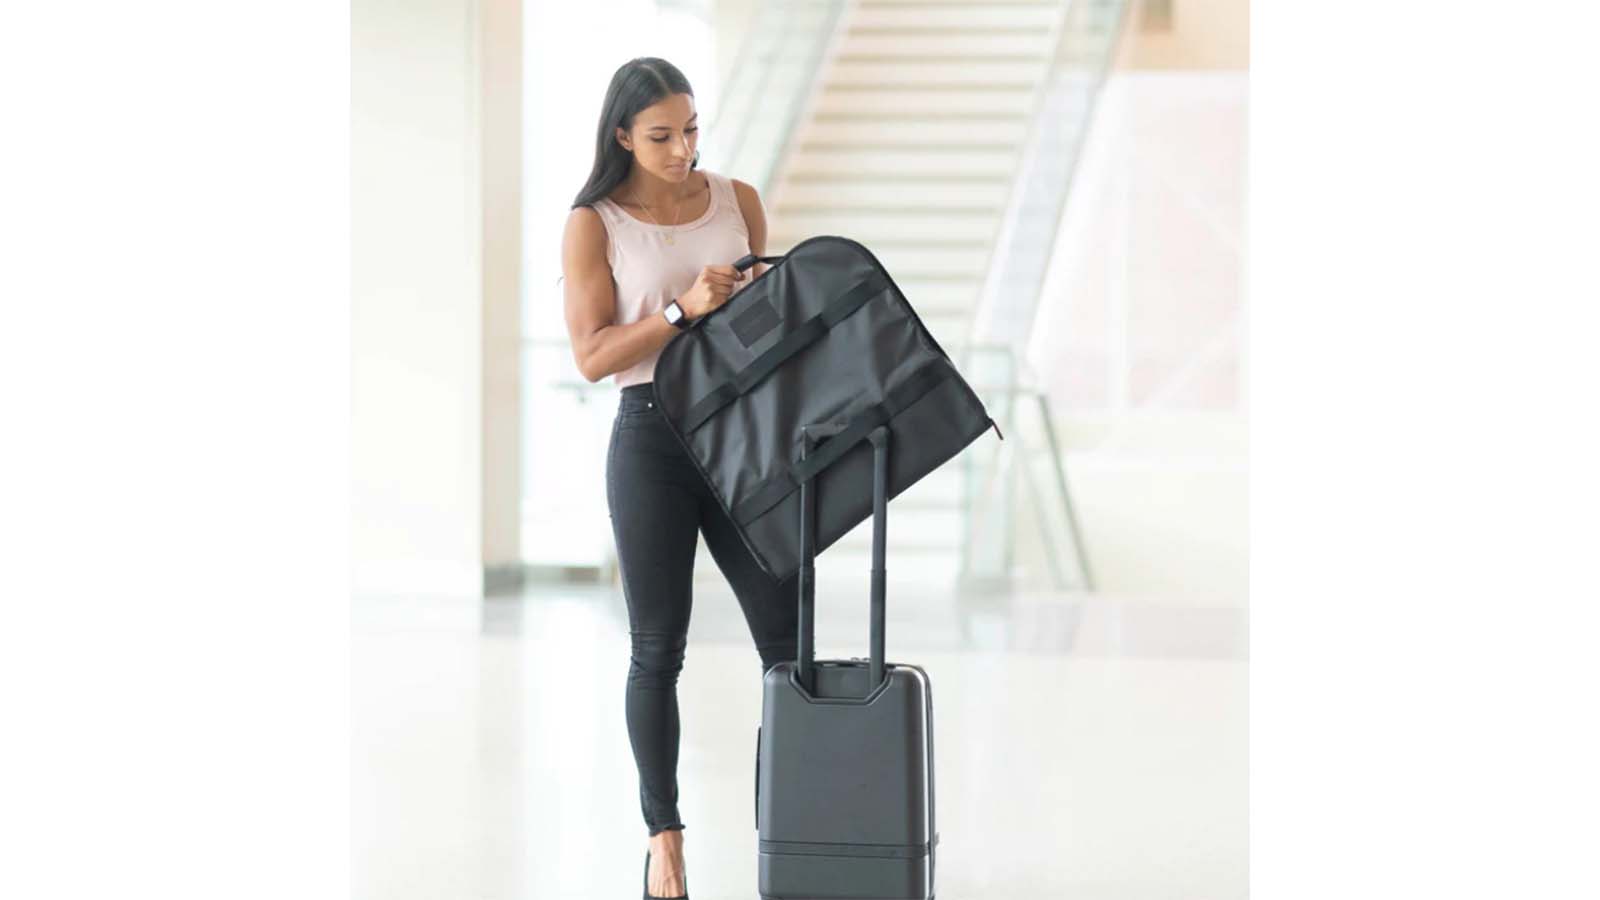 VOHEN Garment Bags for Travel - Stylish and Durable Travel Bag for Suits,  Dresses, and More - Suit B…See more VOHEN Garment Bags for Travel - Stylish